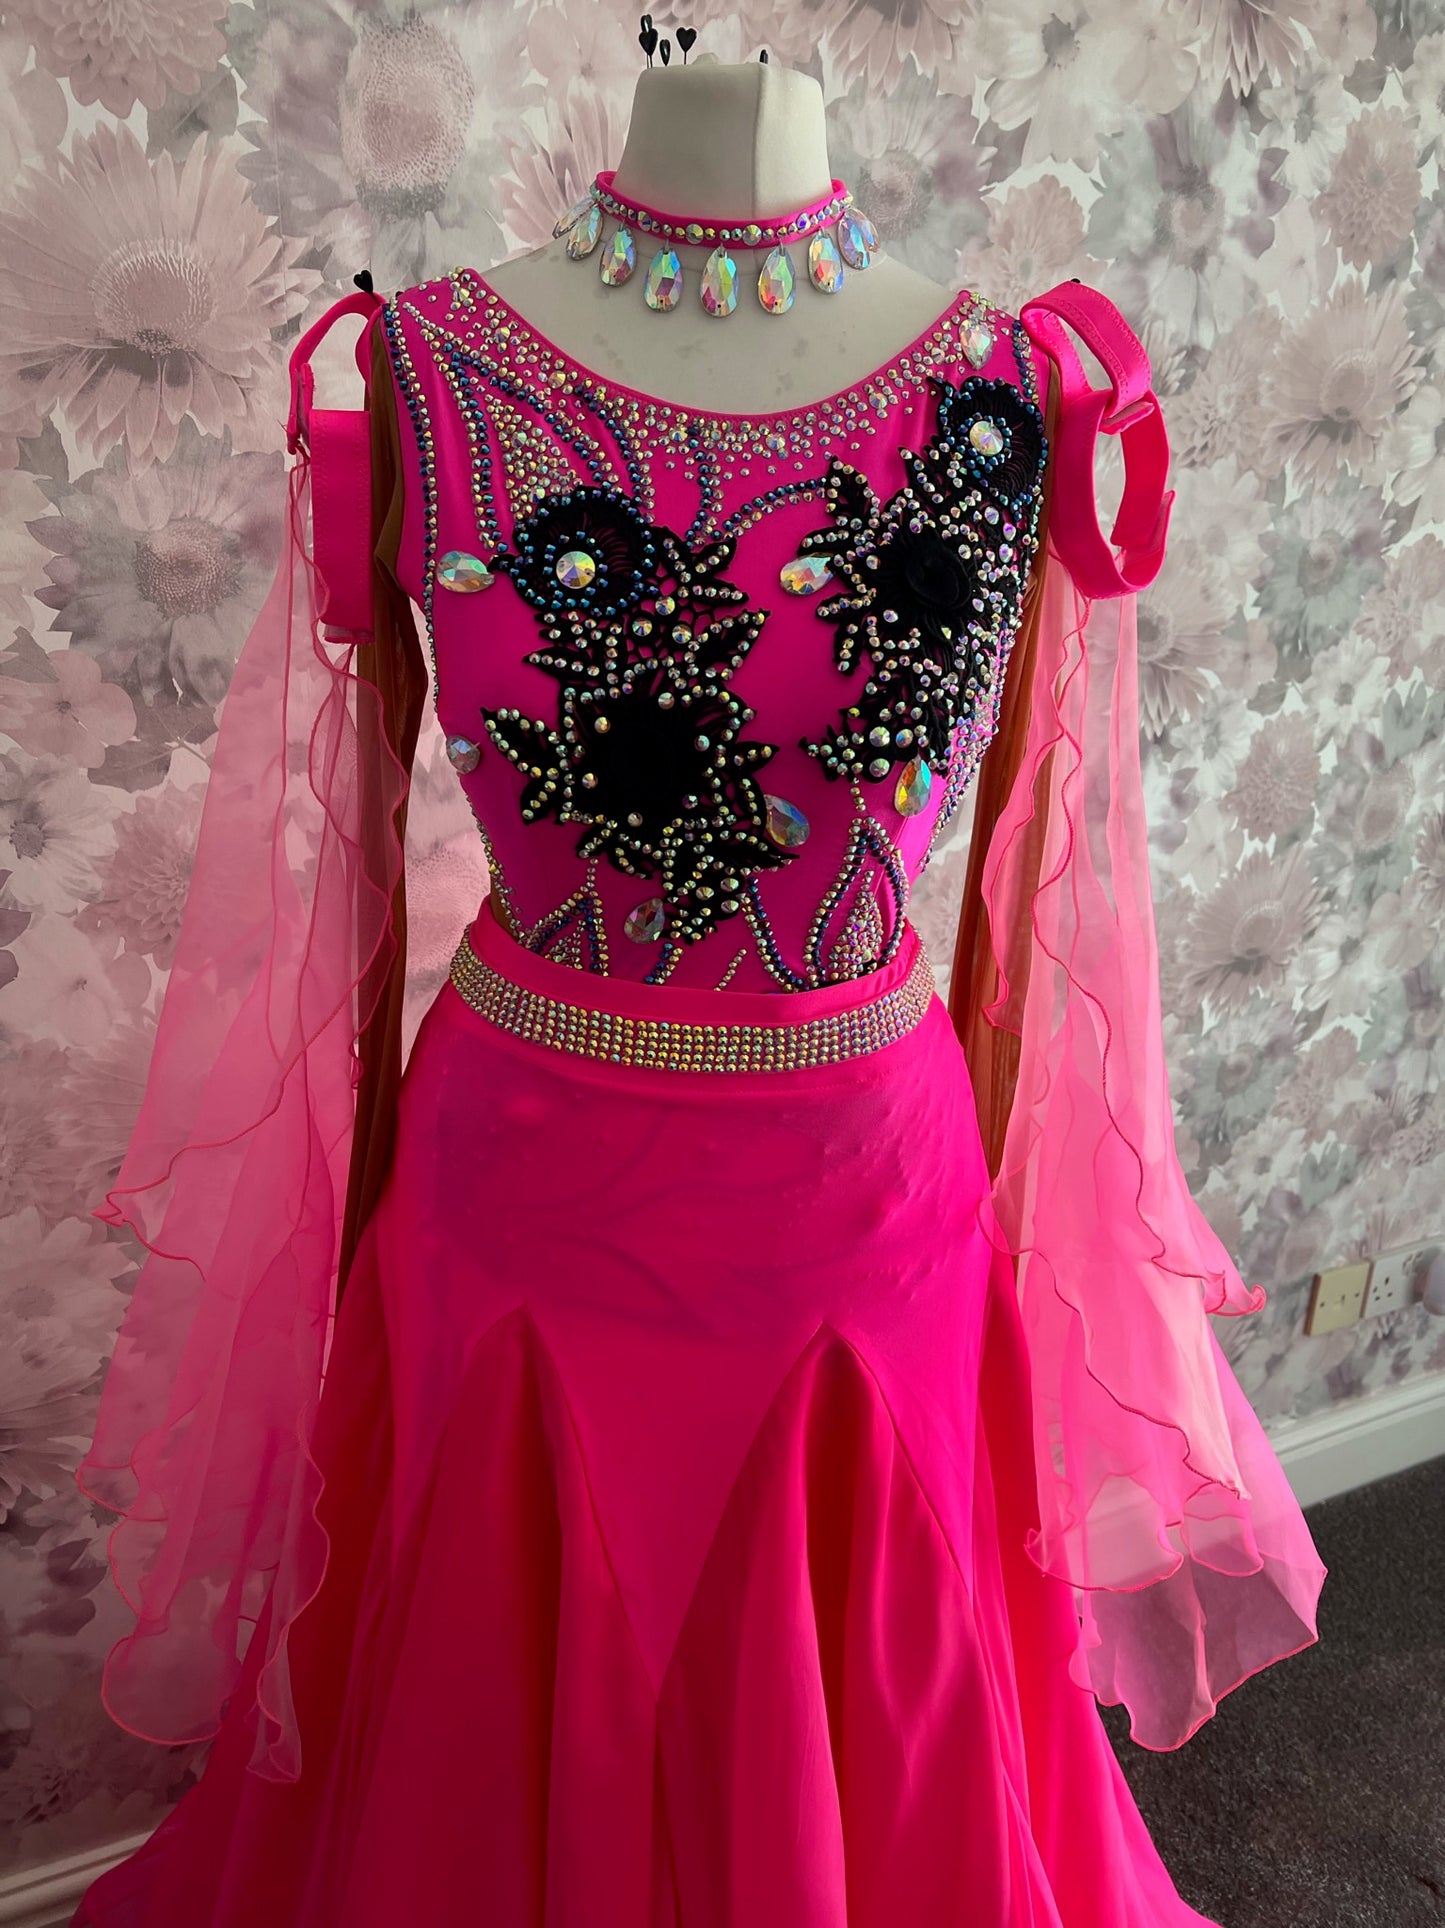 014 Flo Pink Latin dress with black appliqué. Decorated with AB & Light Rose stones with full fringed skirt. Ballroom Skirt & x4 arm floats plus AB stoned belt